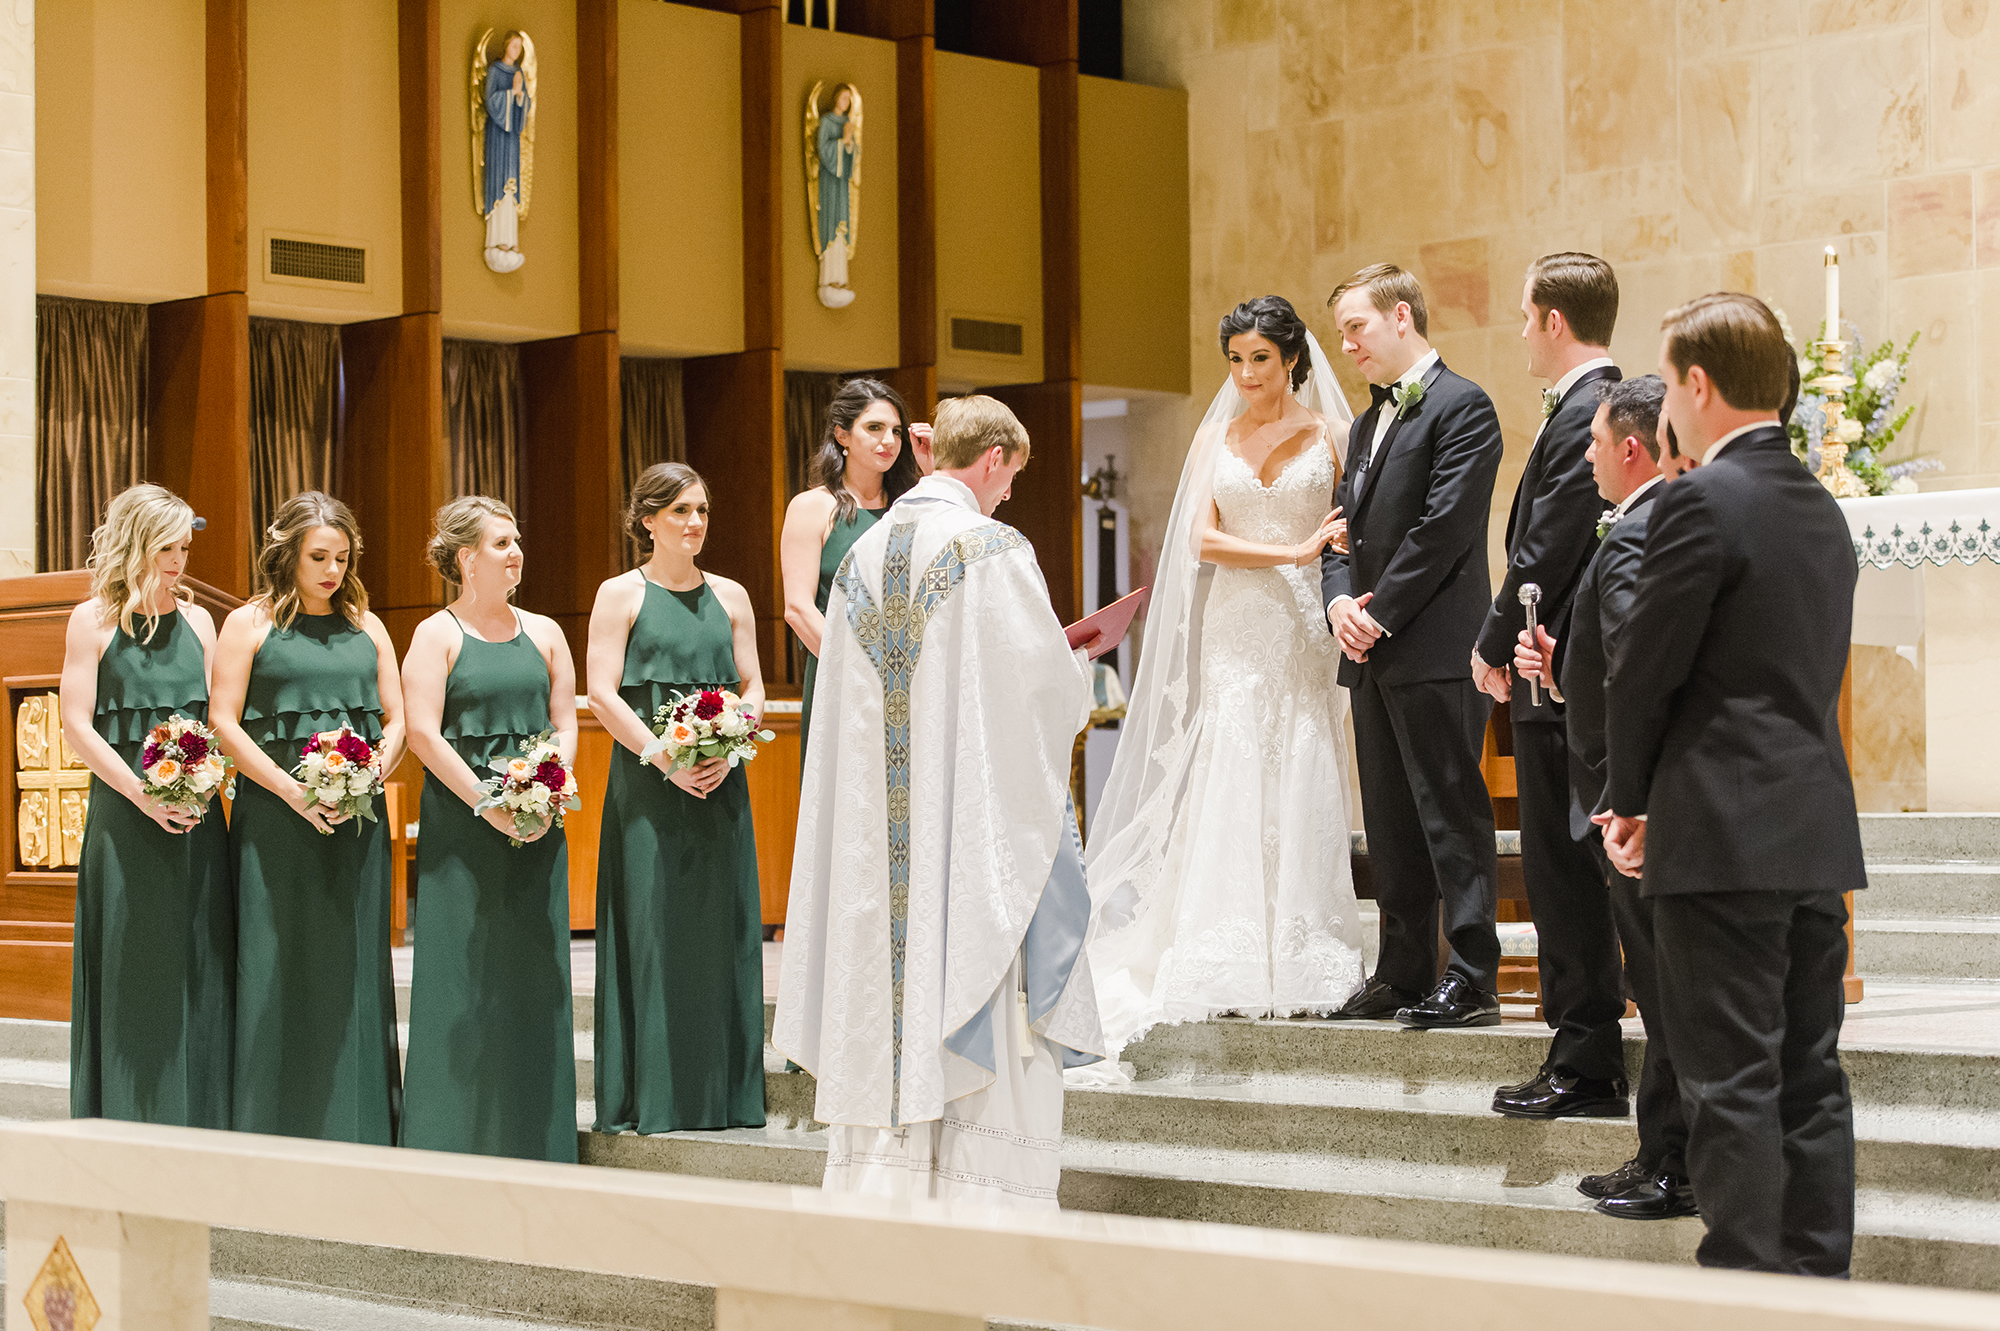 Bride, groom, wedding party and priest during wedding ceremony